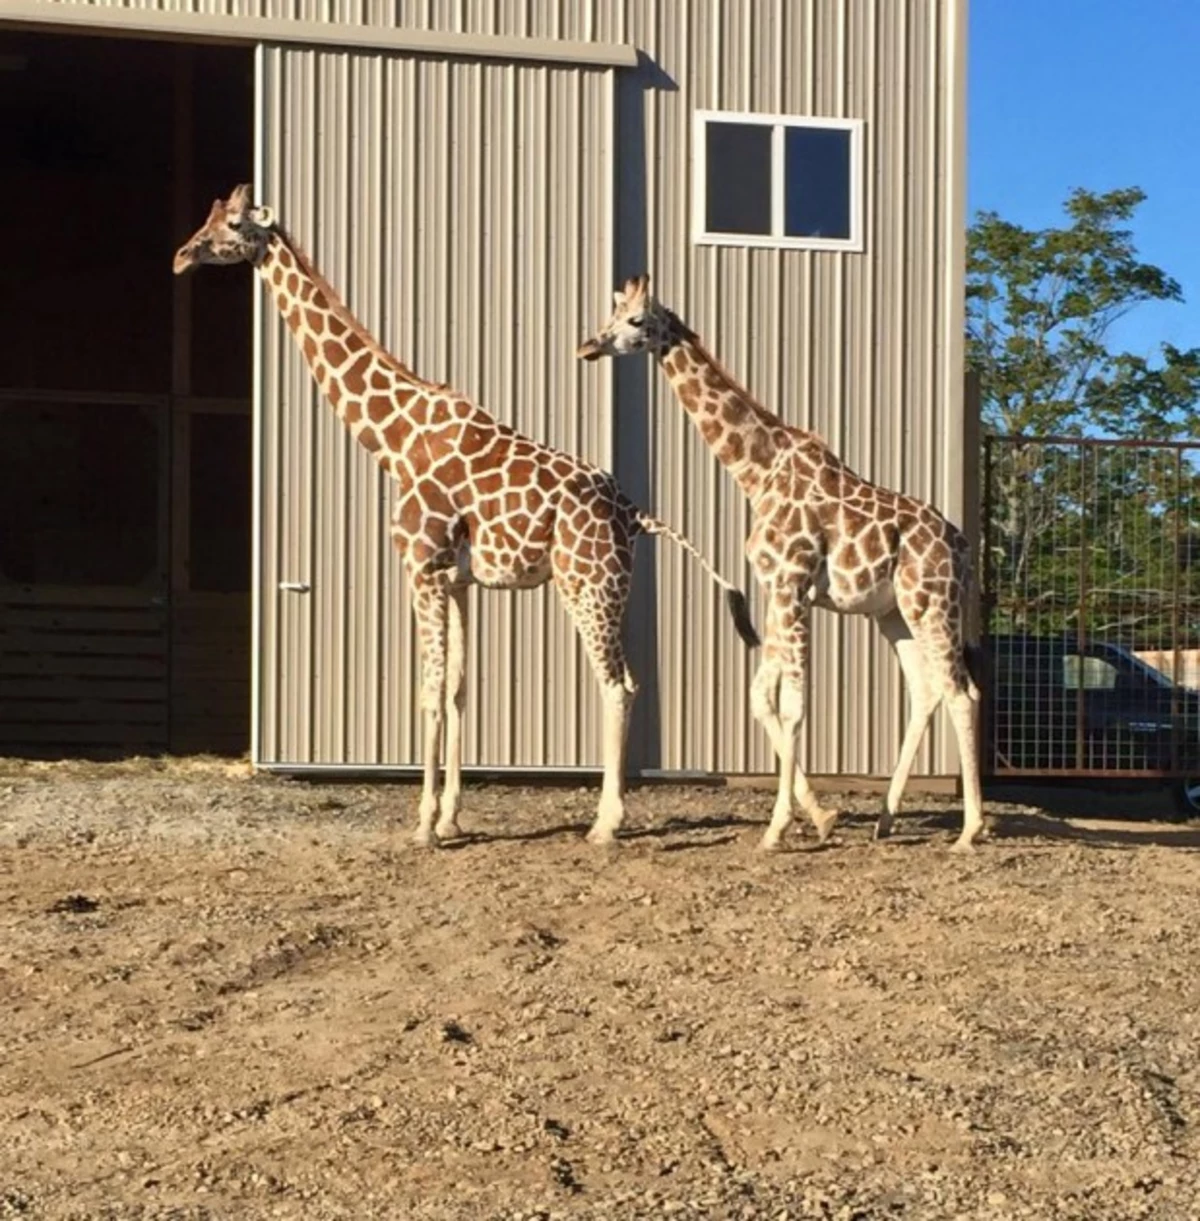 Is a Giraffe On The Way at Animal Adventure?